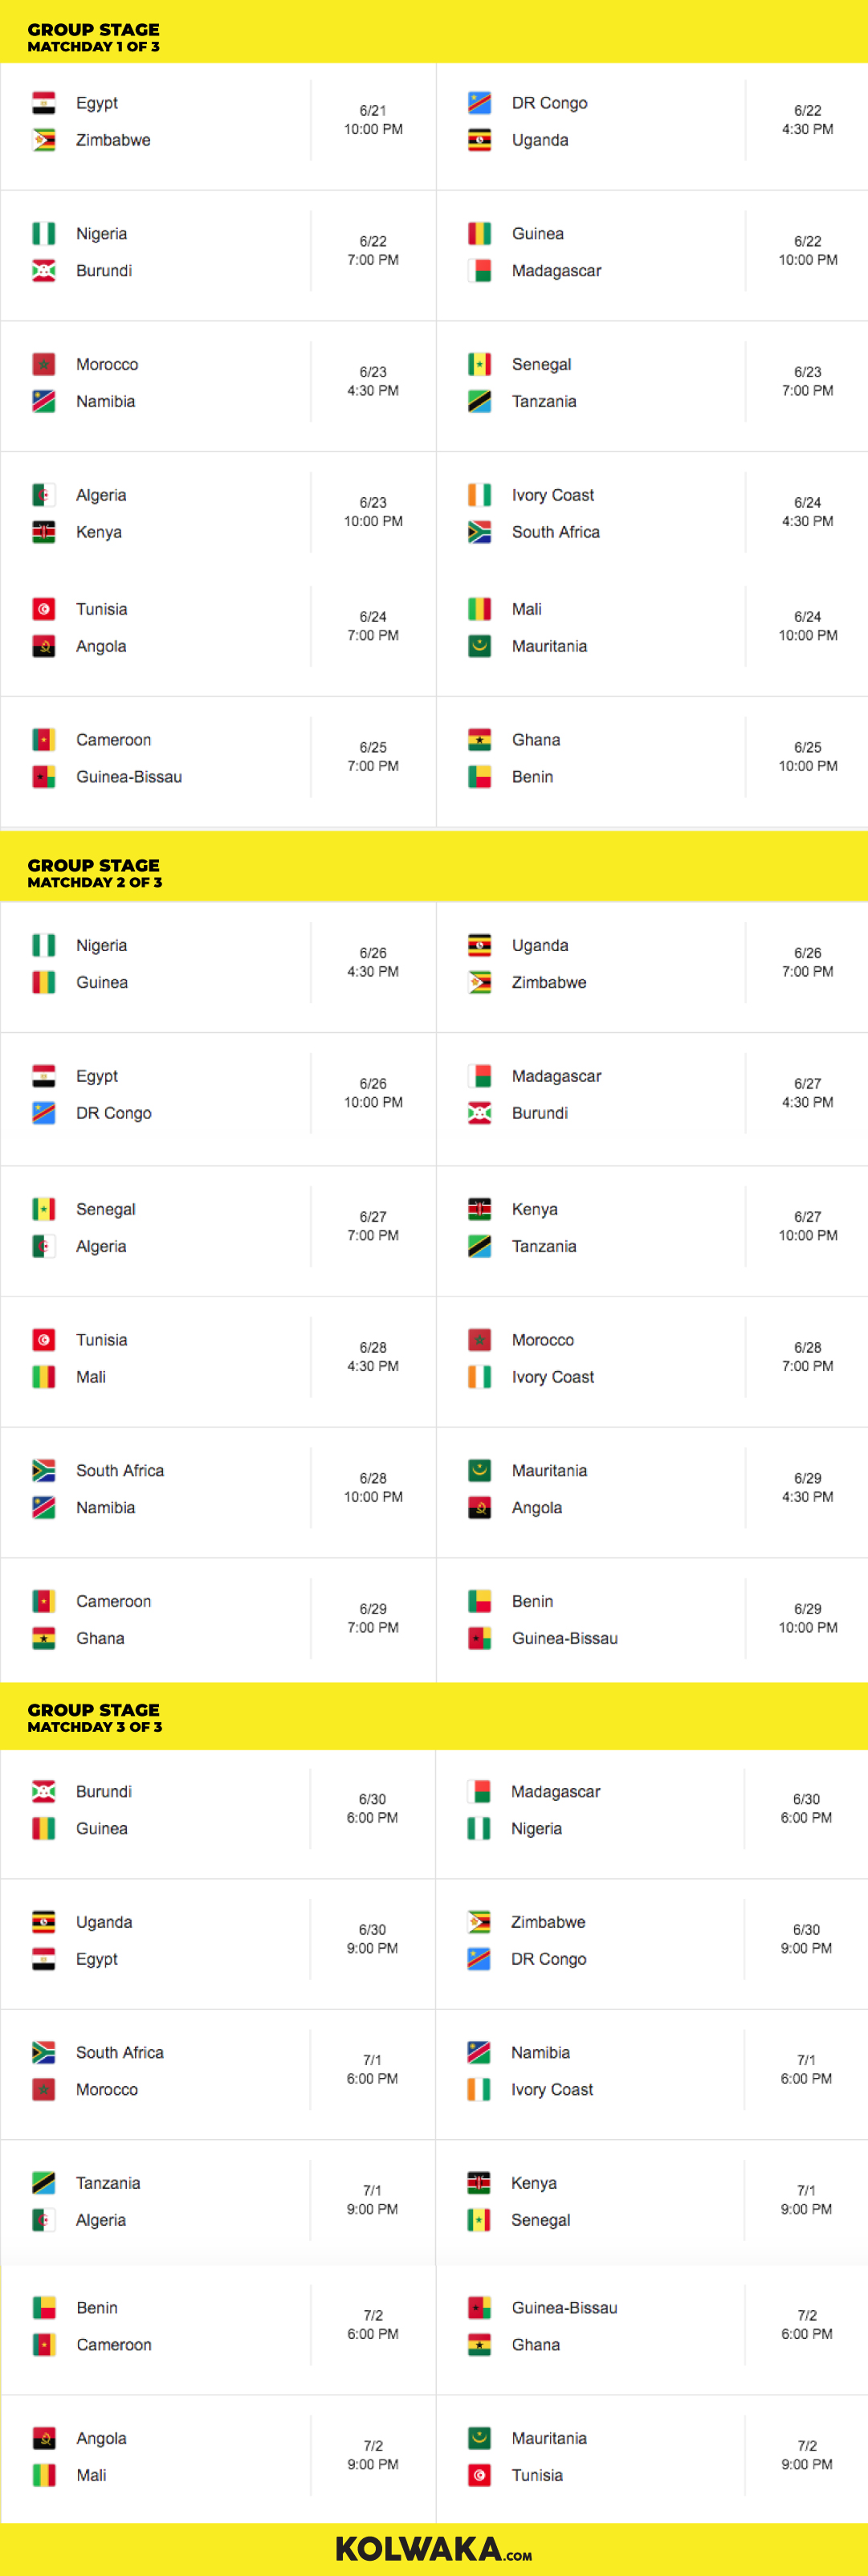 YOUR GUIDE TO AFRICA'S CUP OF NATIONS! Kolwaka